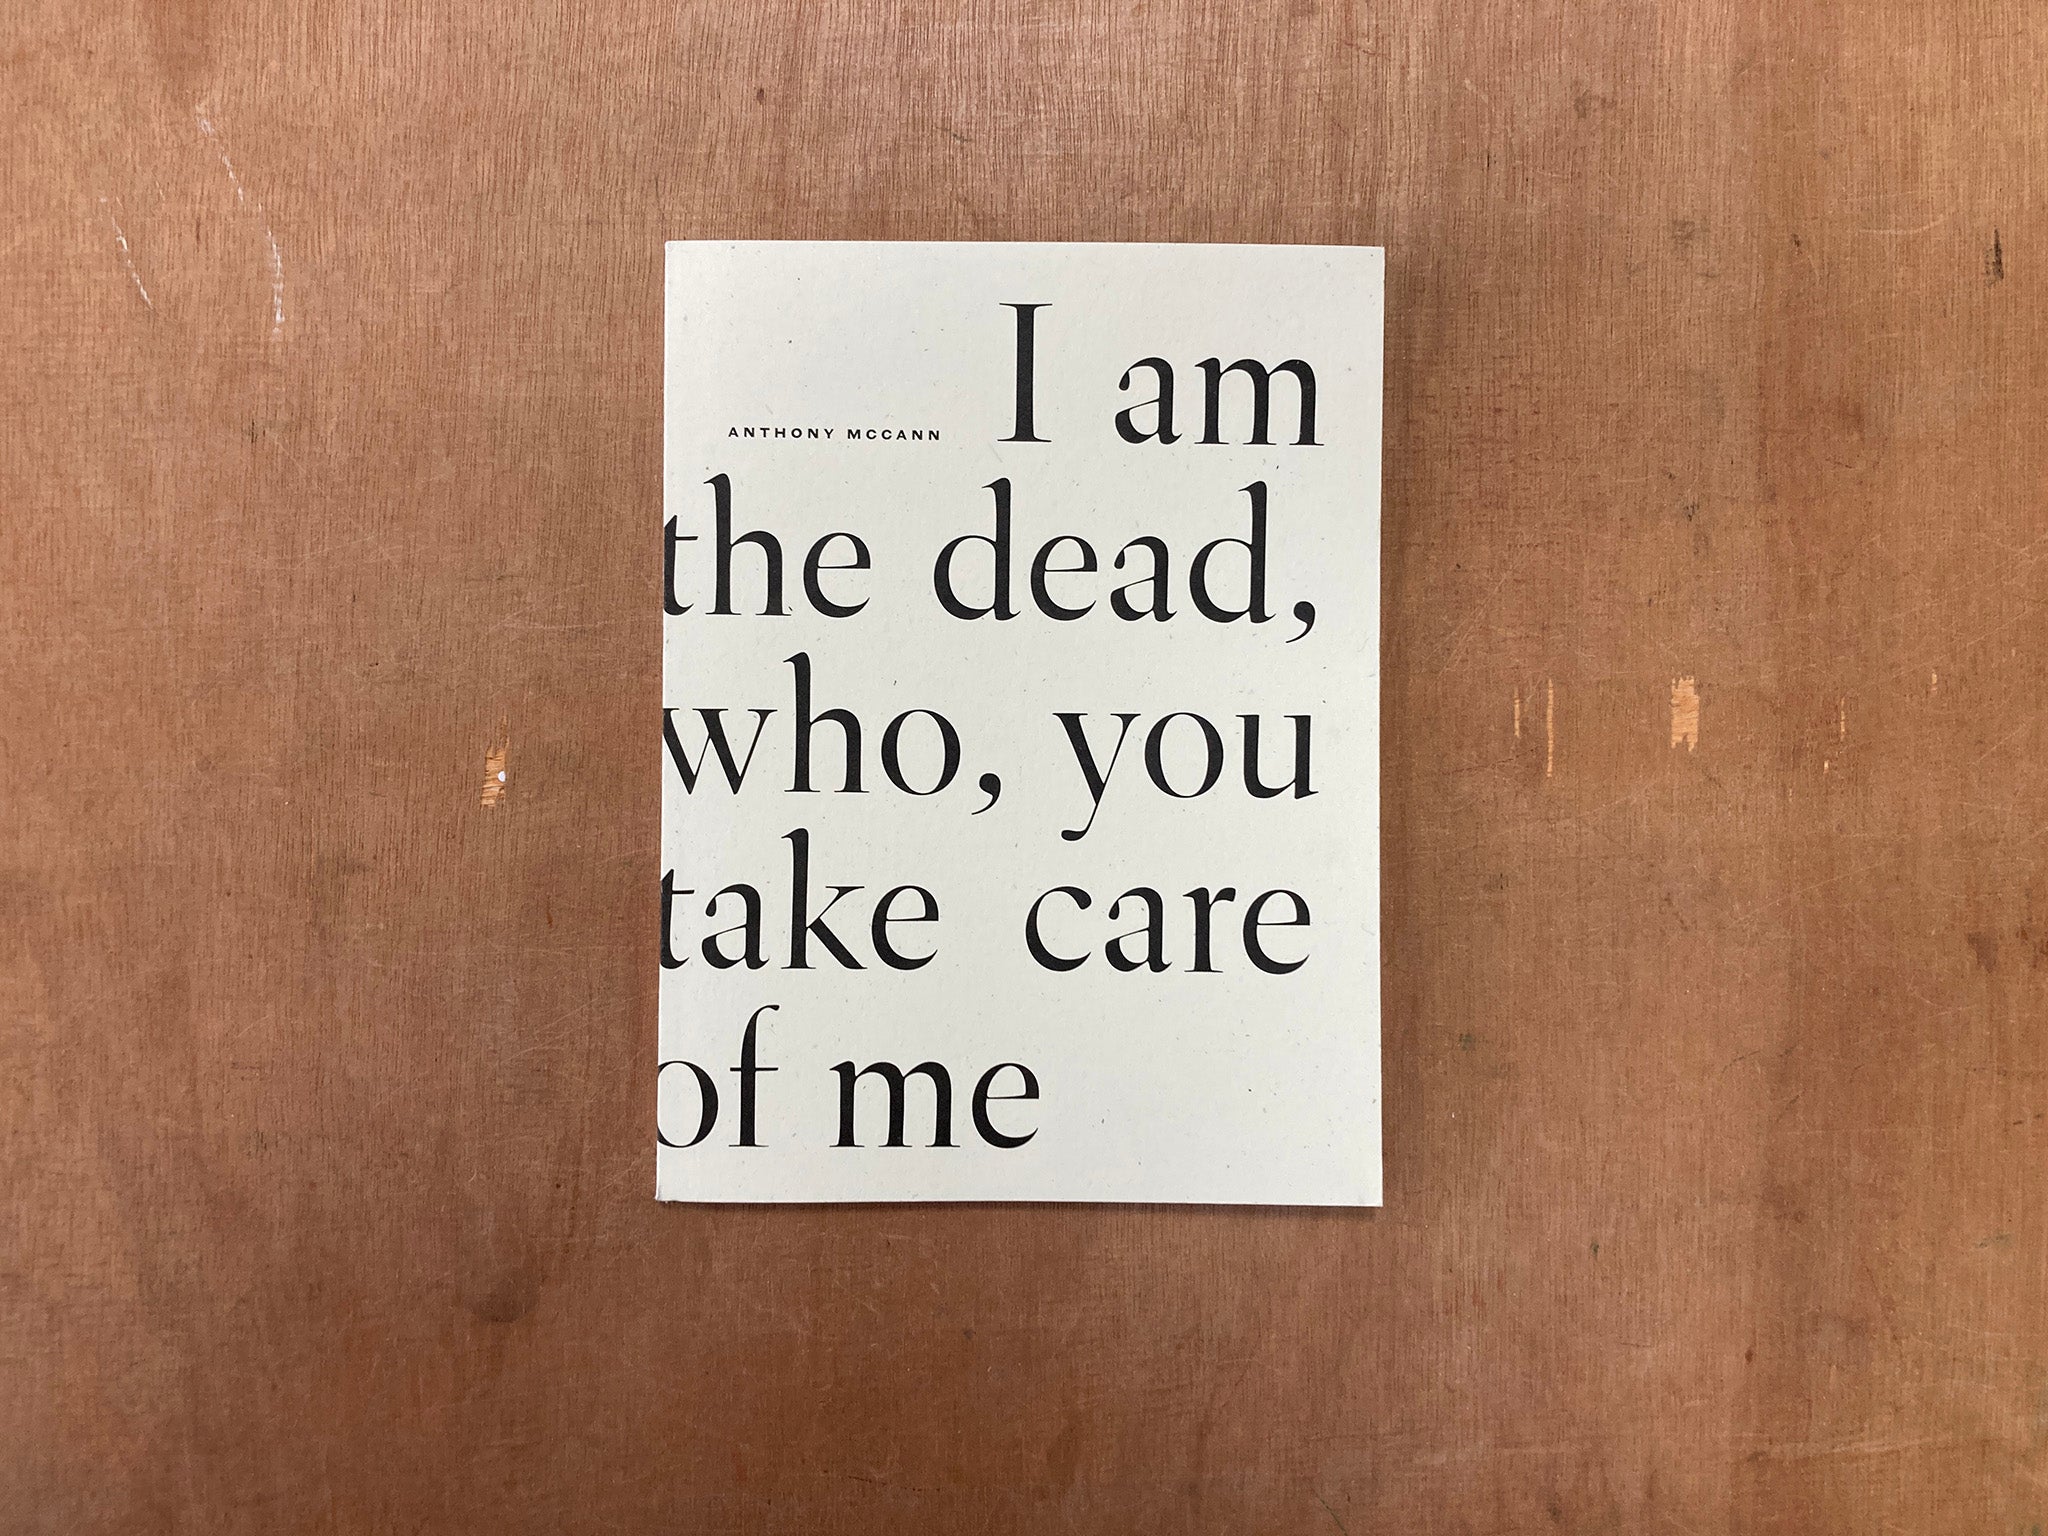 I AM THE DEAD, WHO, YOU TAKE CARE OF ME by Anthony McCann